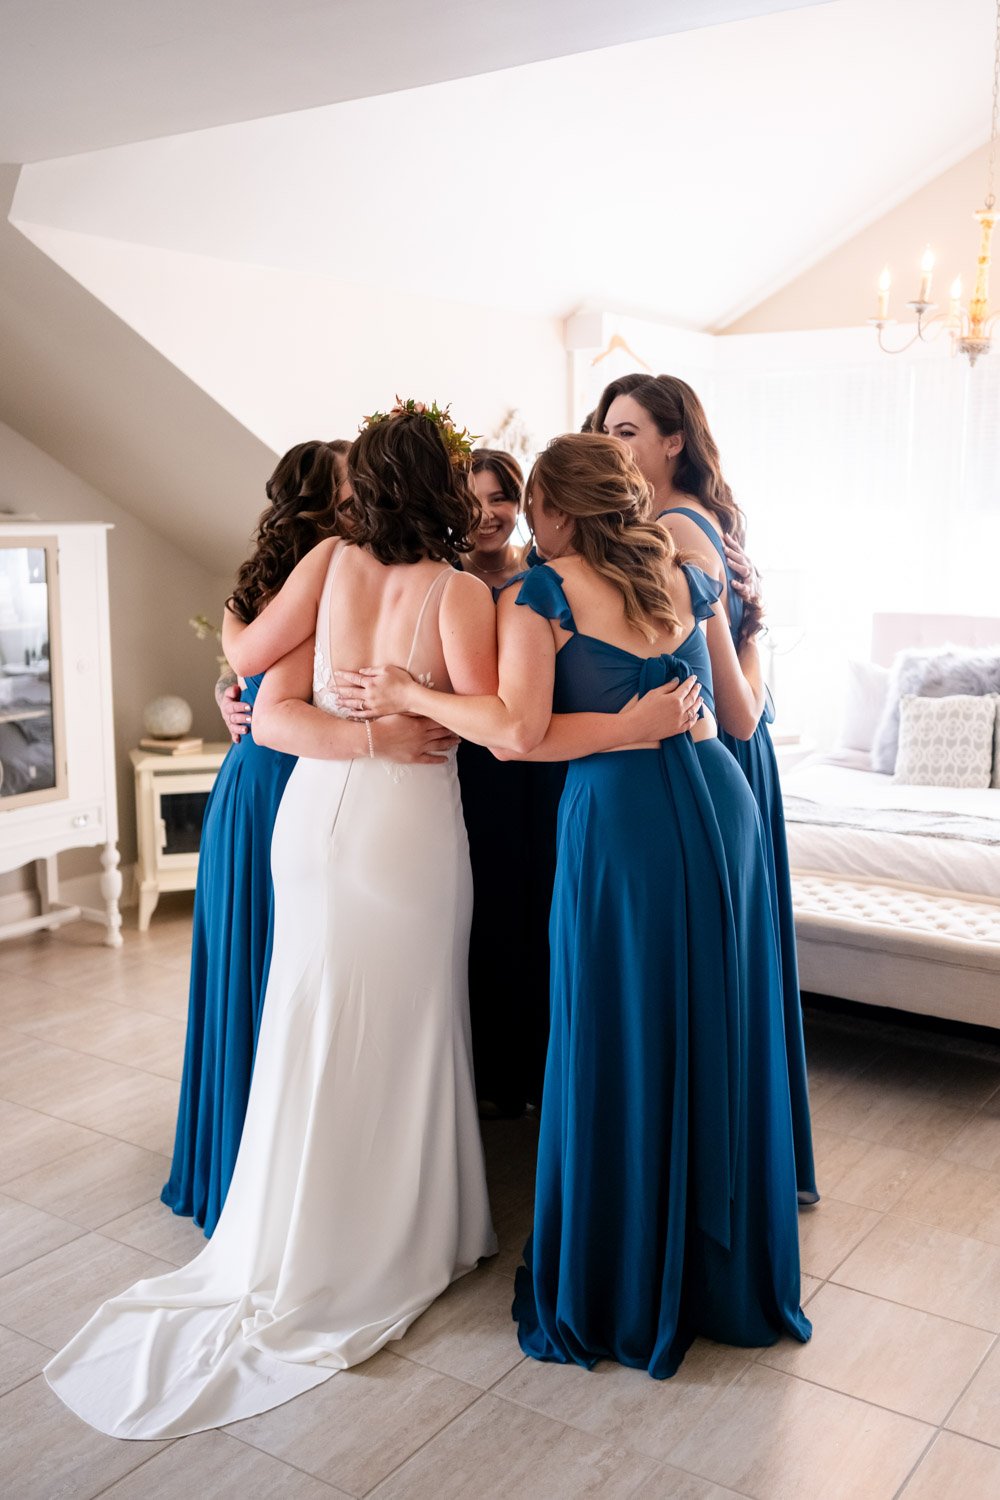 photo of bridesmaids reacting to seeing the bride in her wedding dress for the first time.